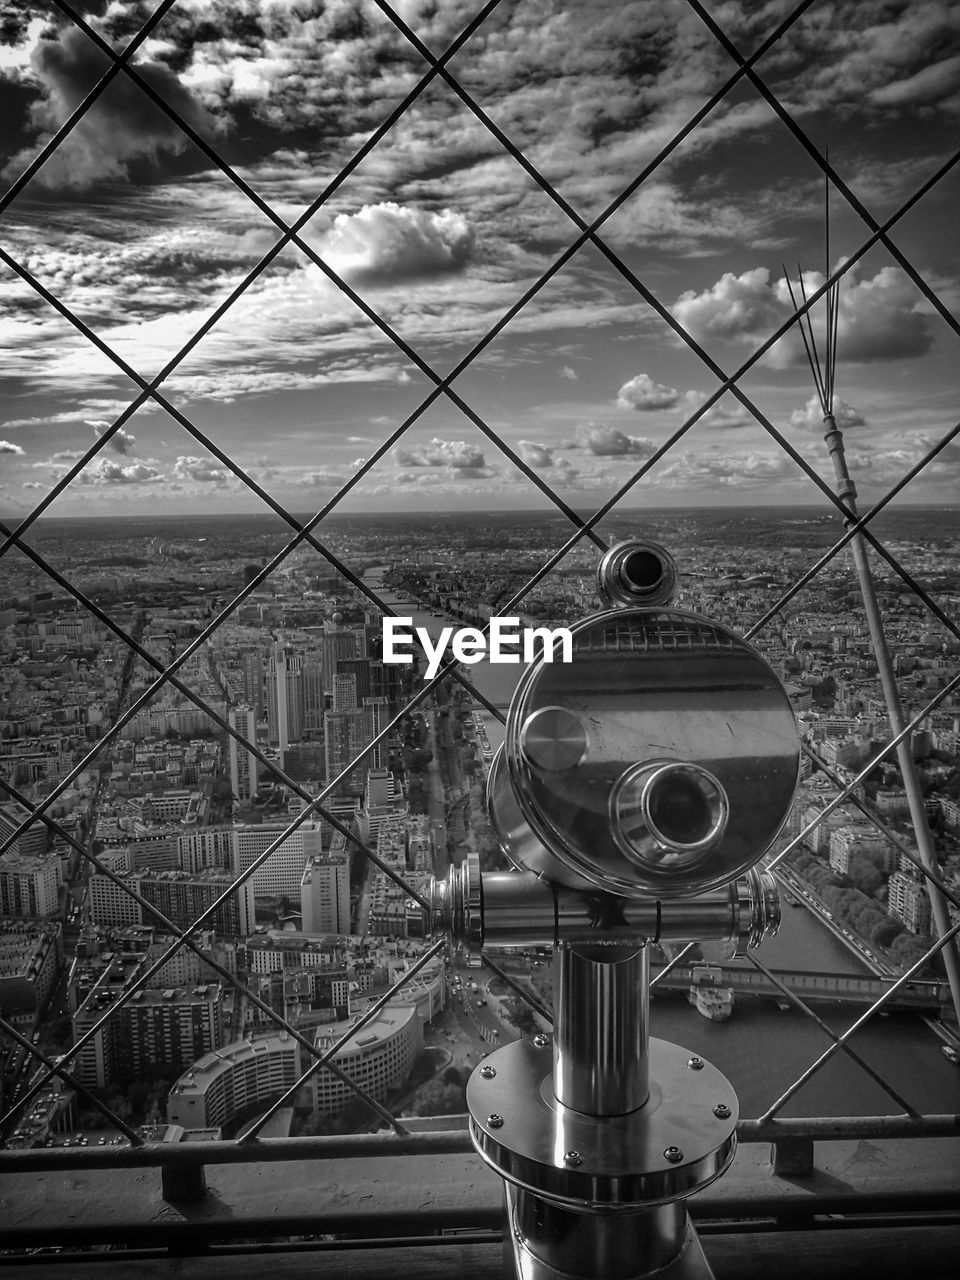 Coin operated binoculars overlooking cityscape against cloudy sky